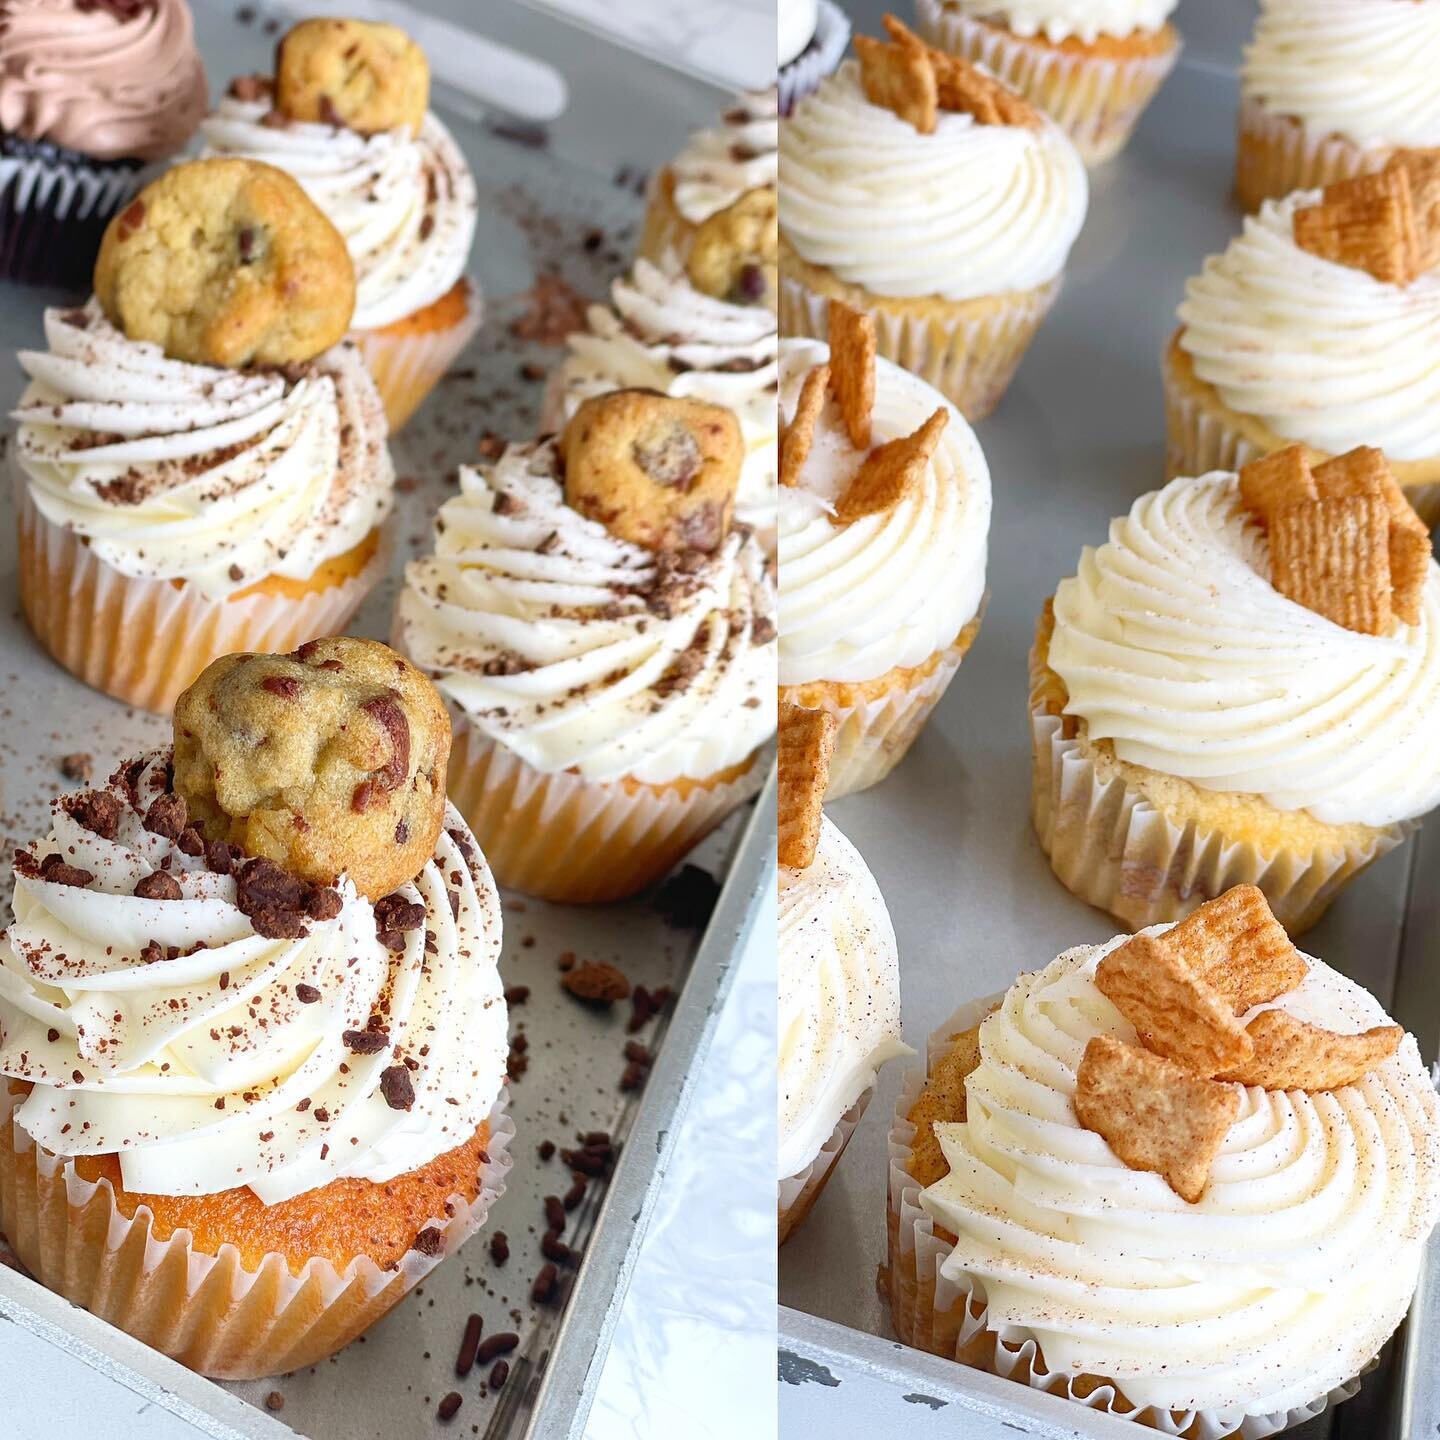 Indulge in our delectable new cupcake flavors, available now in-store! Say hello to CHOCOLATE CHIP COOKIE DOUGH and CINNAMON TOAST CRUNCH! Hurry in before they're all snatched up. 

 😍 #cupcake #cupcakeflavors #newflavors #satisfyyourcravings #sweet